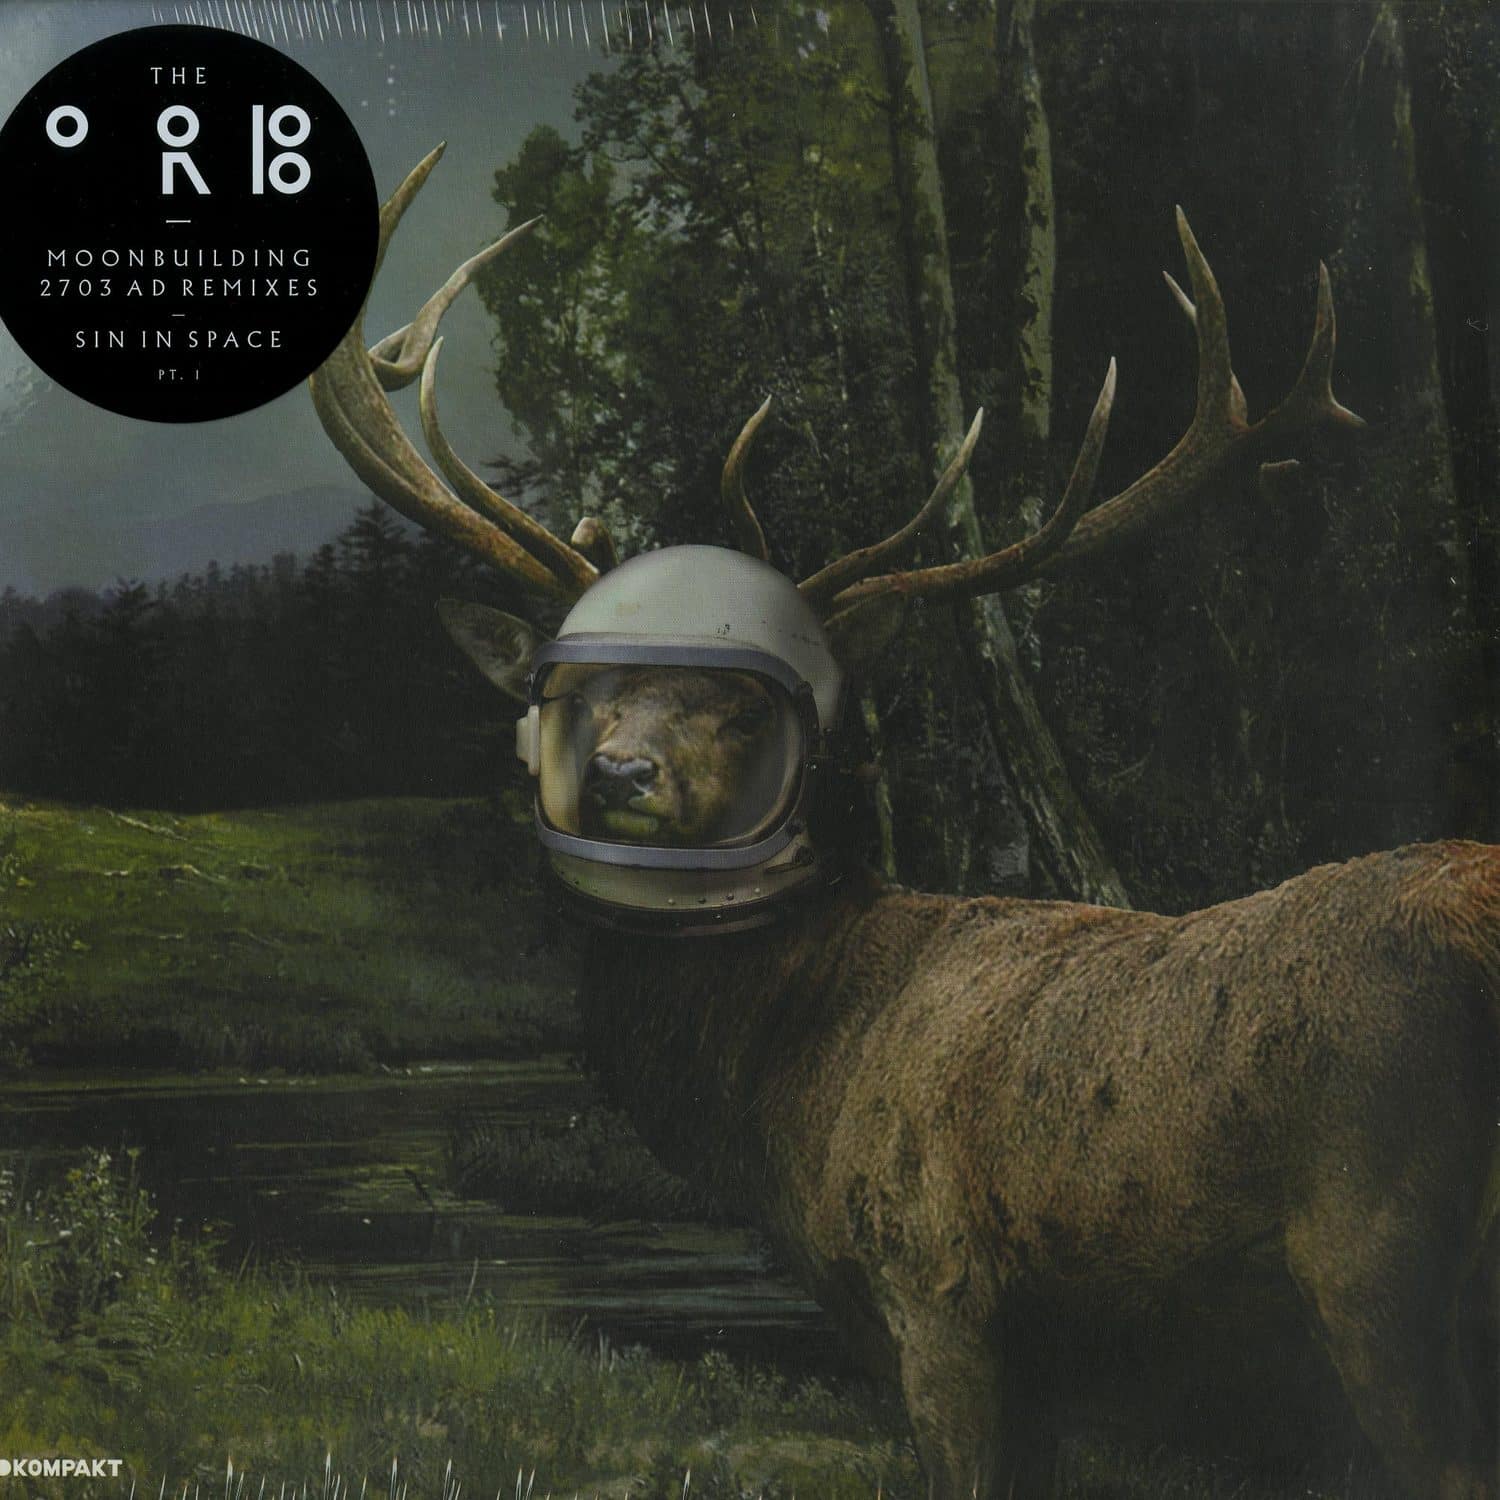 The Orb - MOONBUILDING 2703 AD REMIXES / SIN IN SPACE PT1